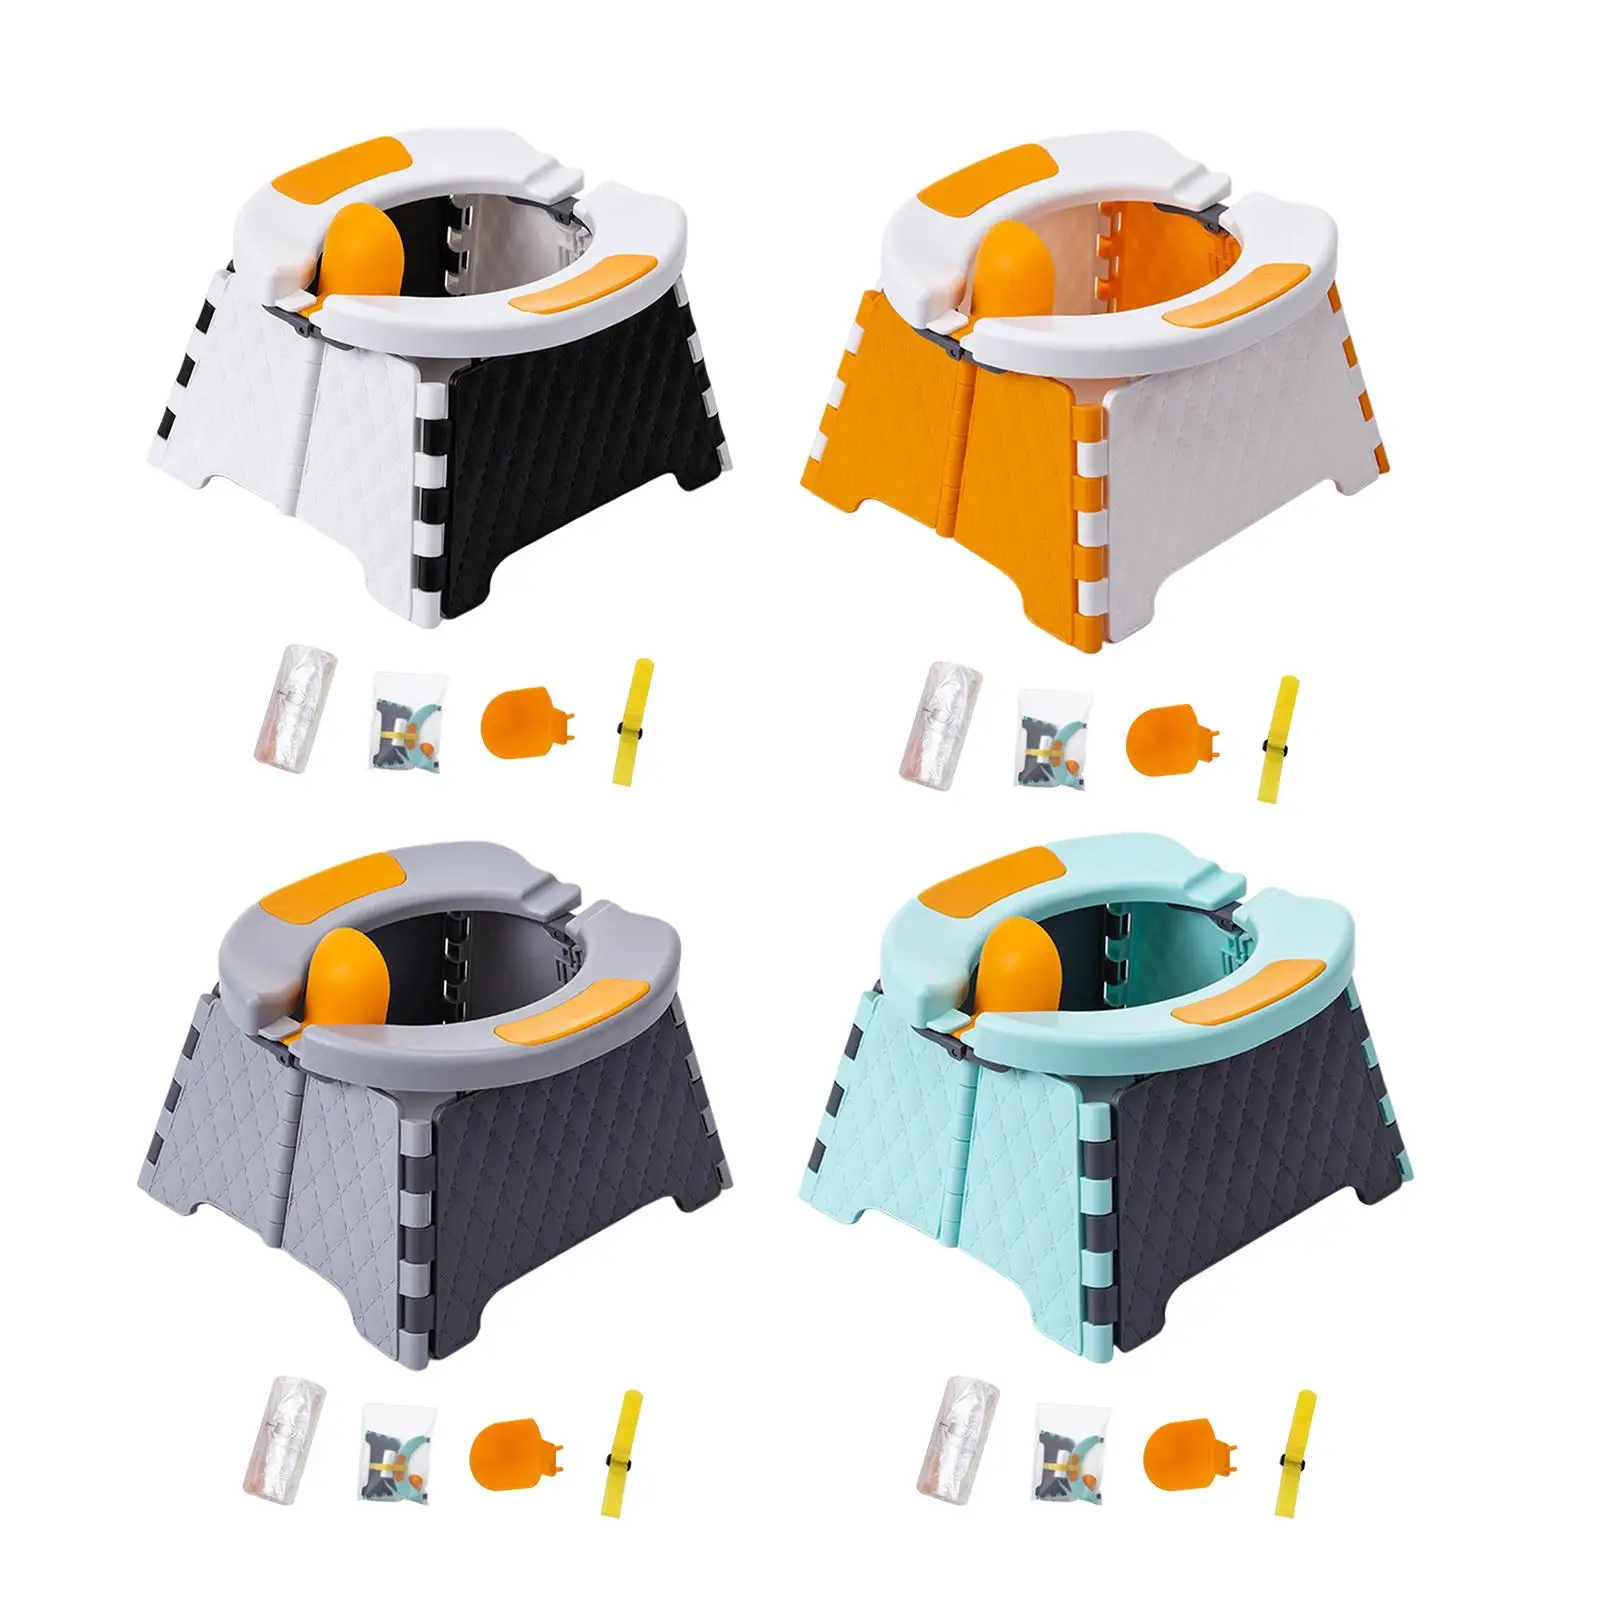 Portable Foldable Training Potty Seat for Toddler Indoor Outdoor